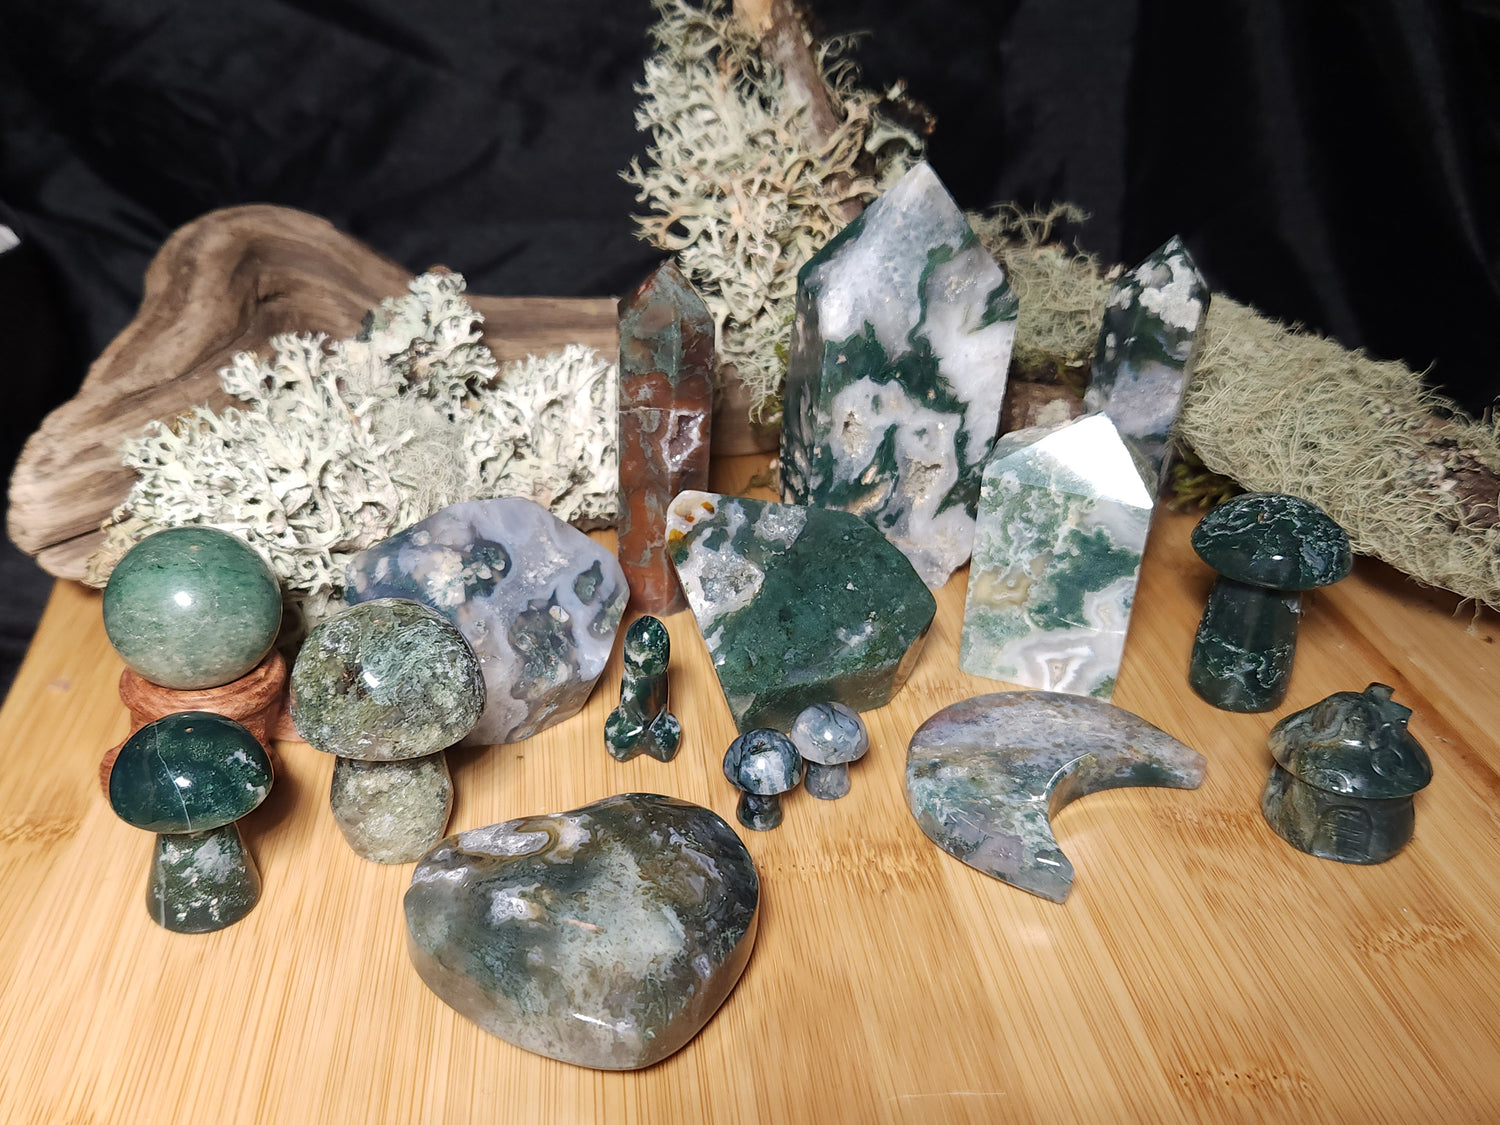 Stones and Crystals